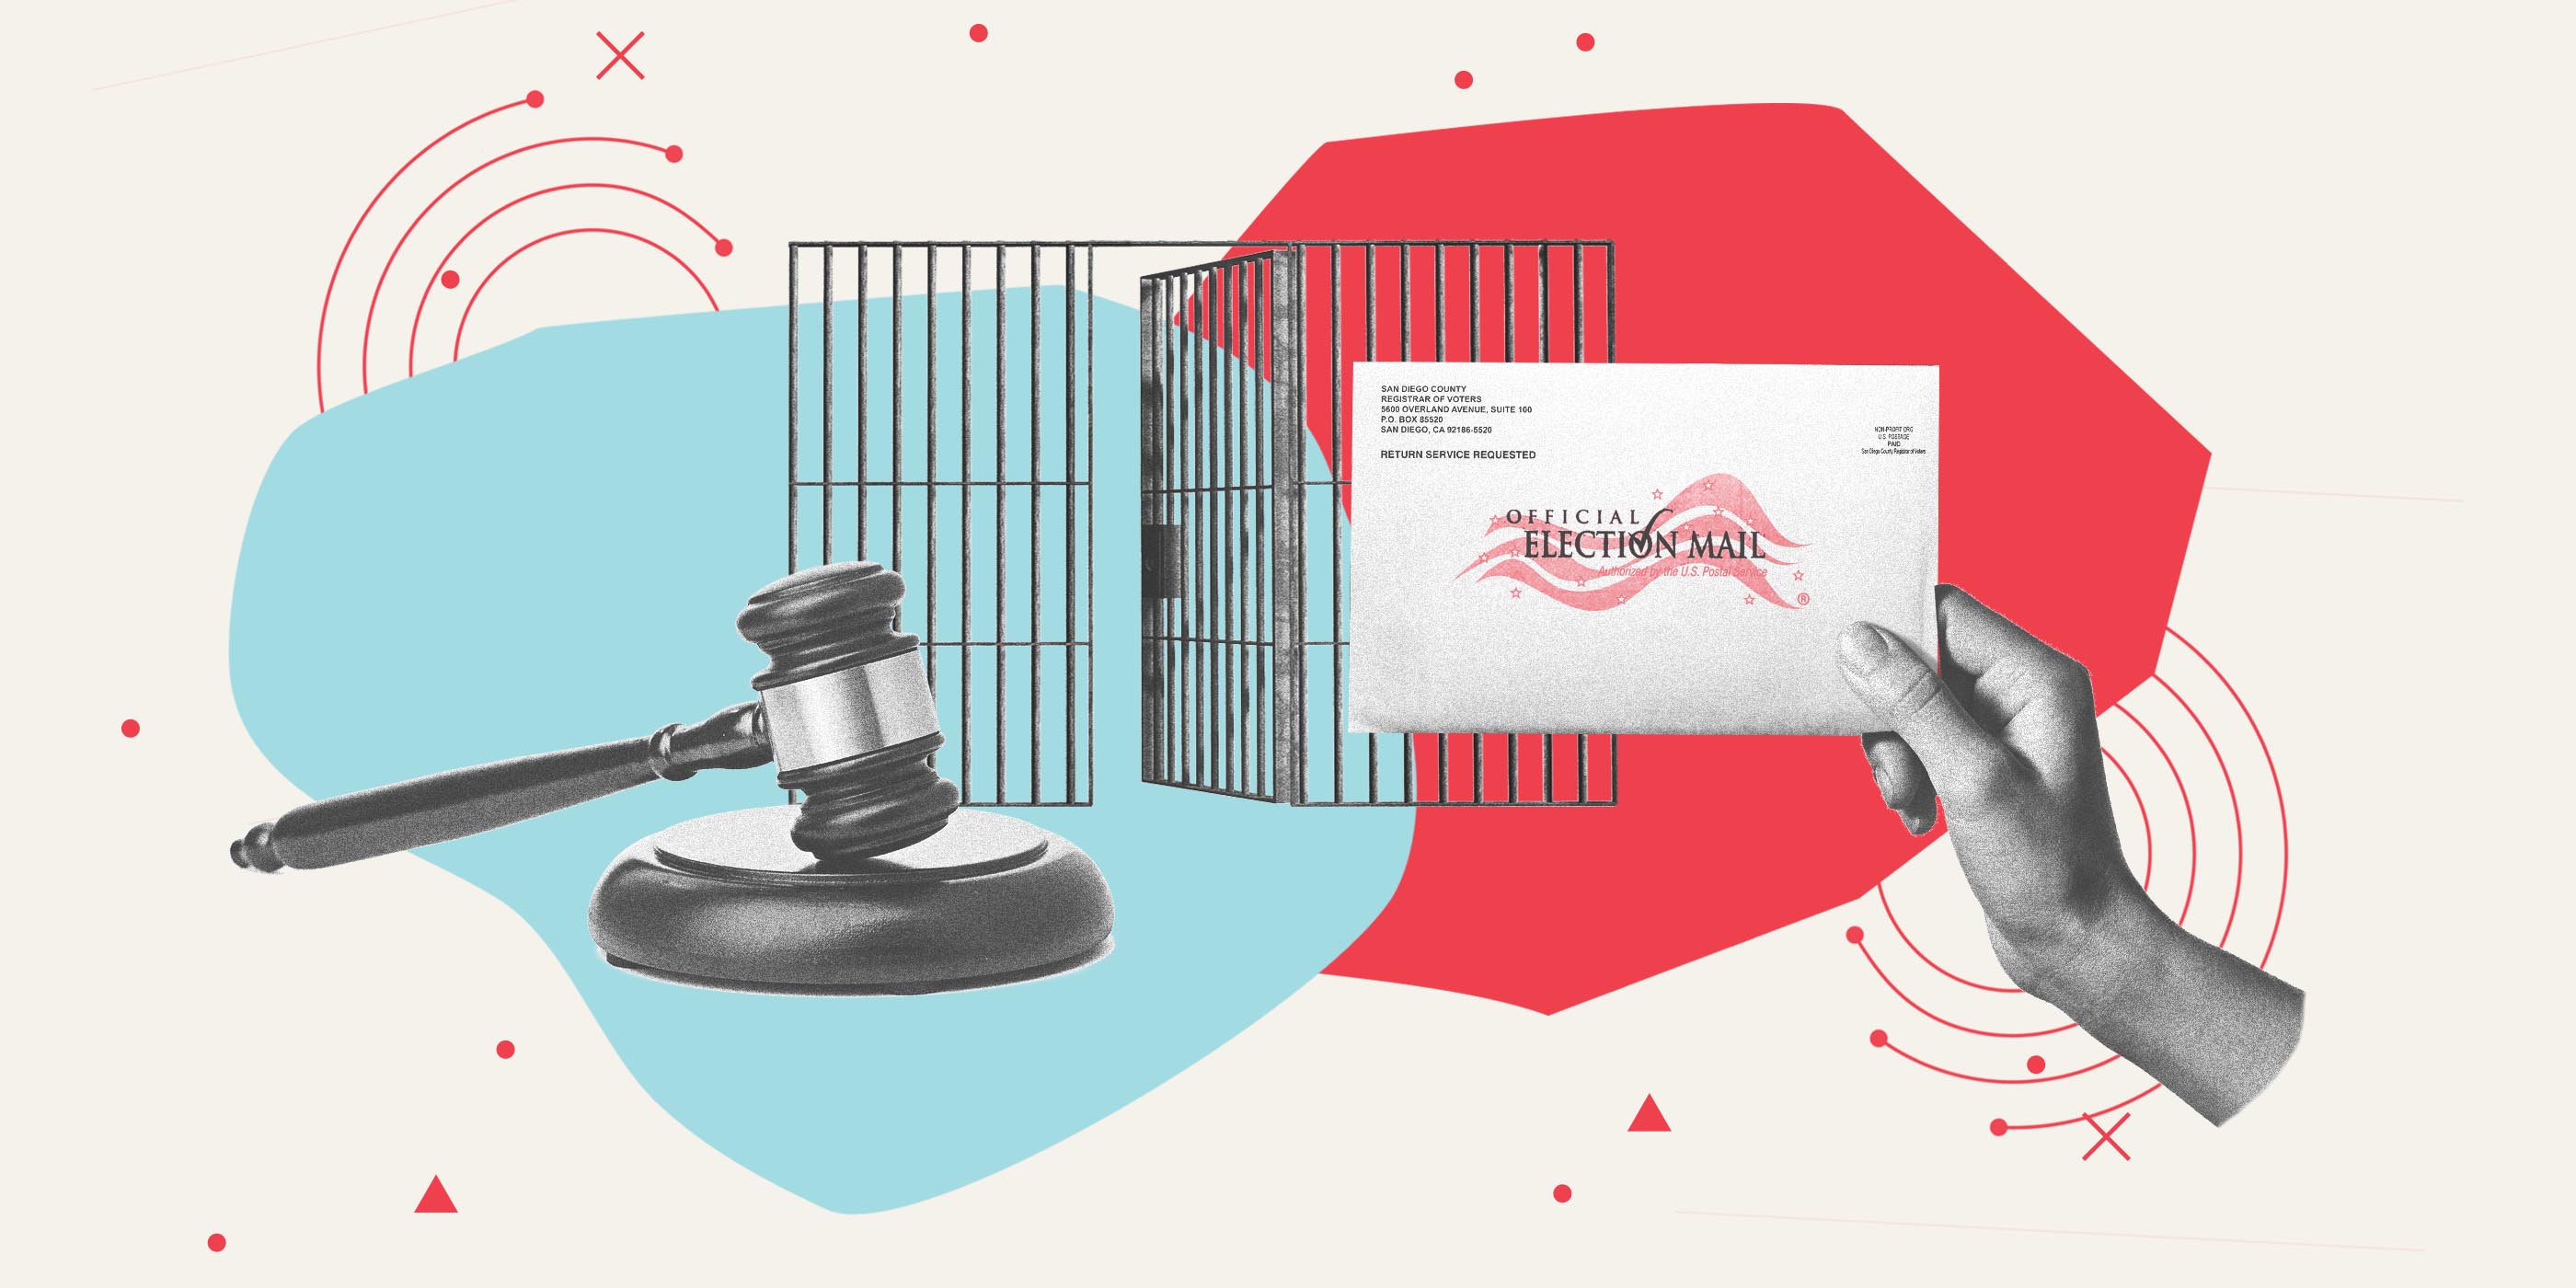 Collage by the ACLU, picturing a judge's gavel, a voting mail envelope, and a cage.